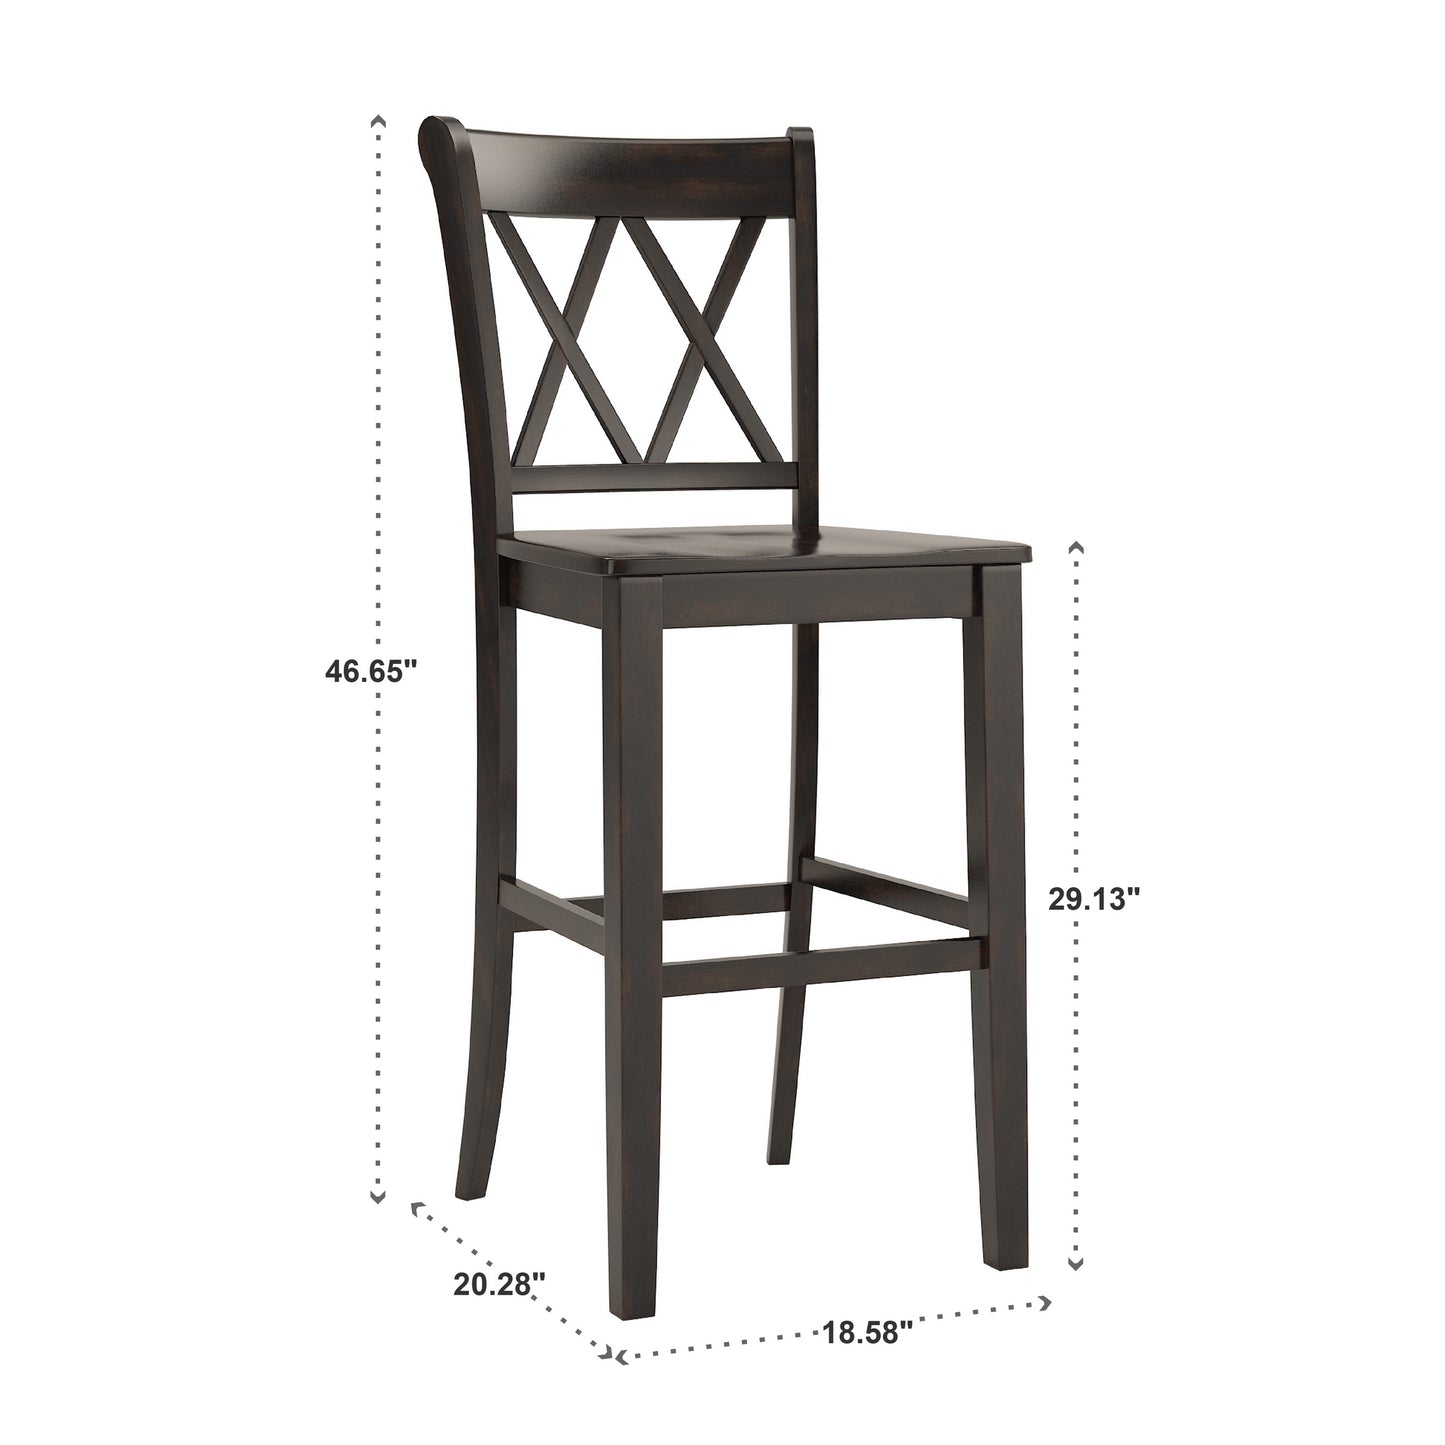 X-Back Bar Height Chairs (Set of 2) - Antique Black Finish